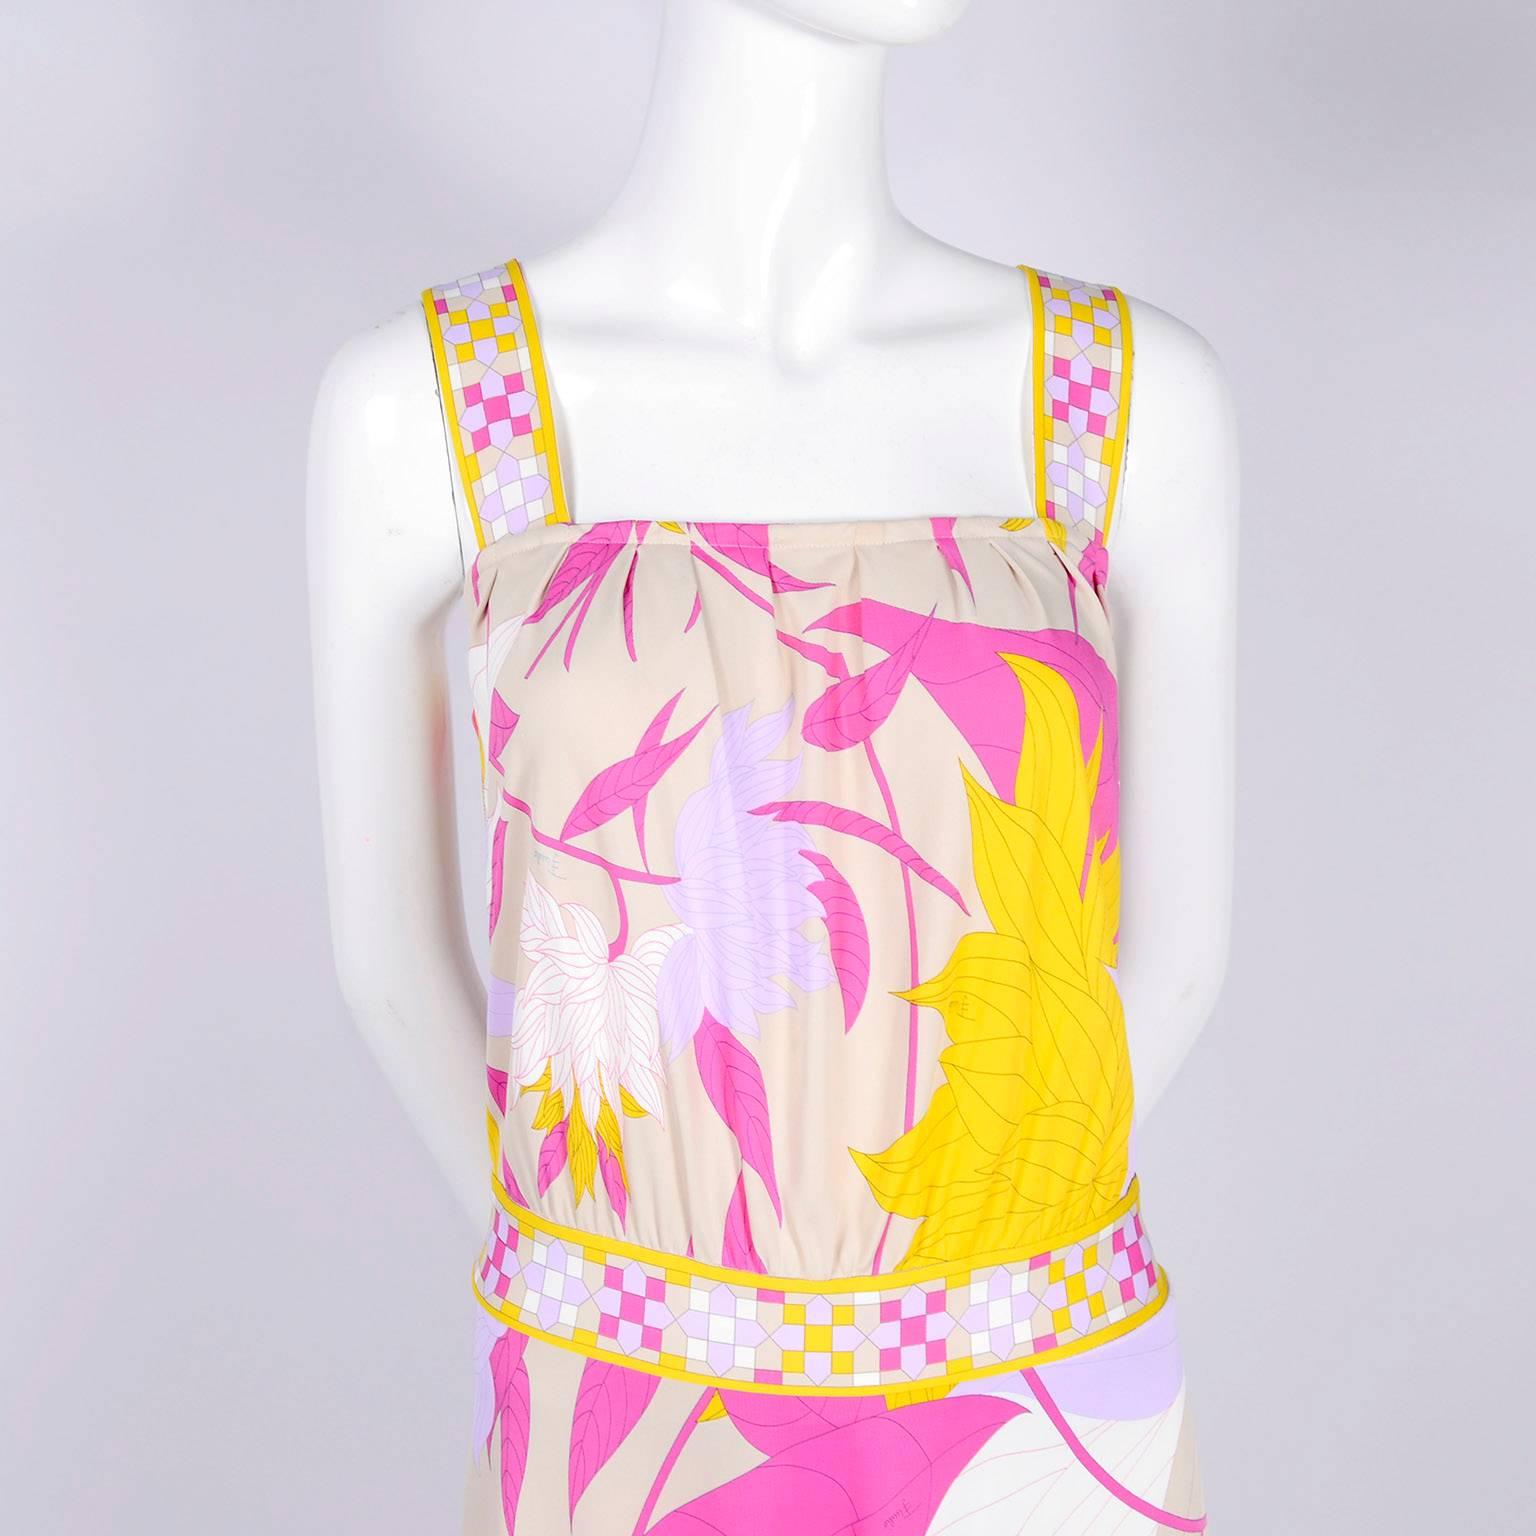 Pucci Rayon Jersey Leaf Floral Print Dress in Pink Cream Yellow and Lavender 10 8